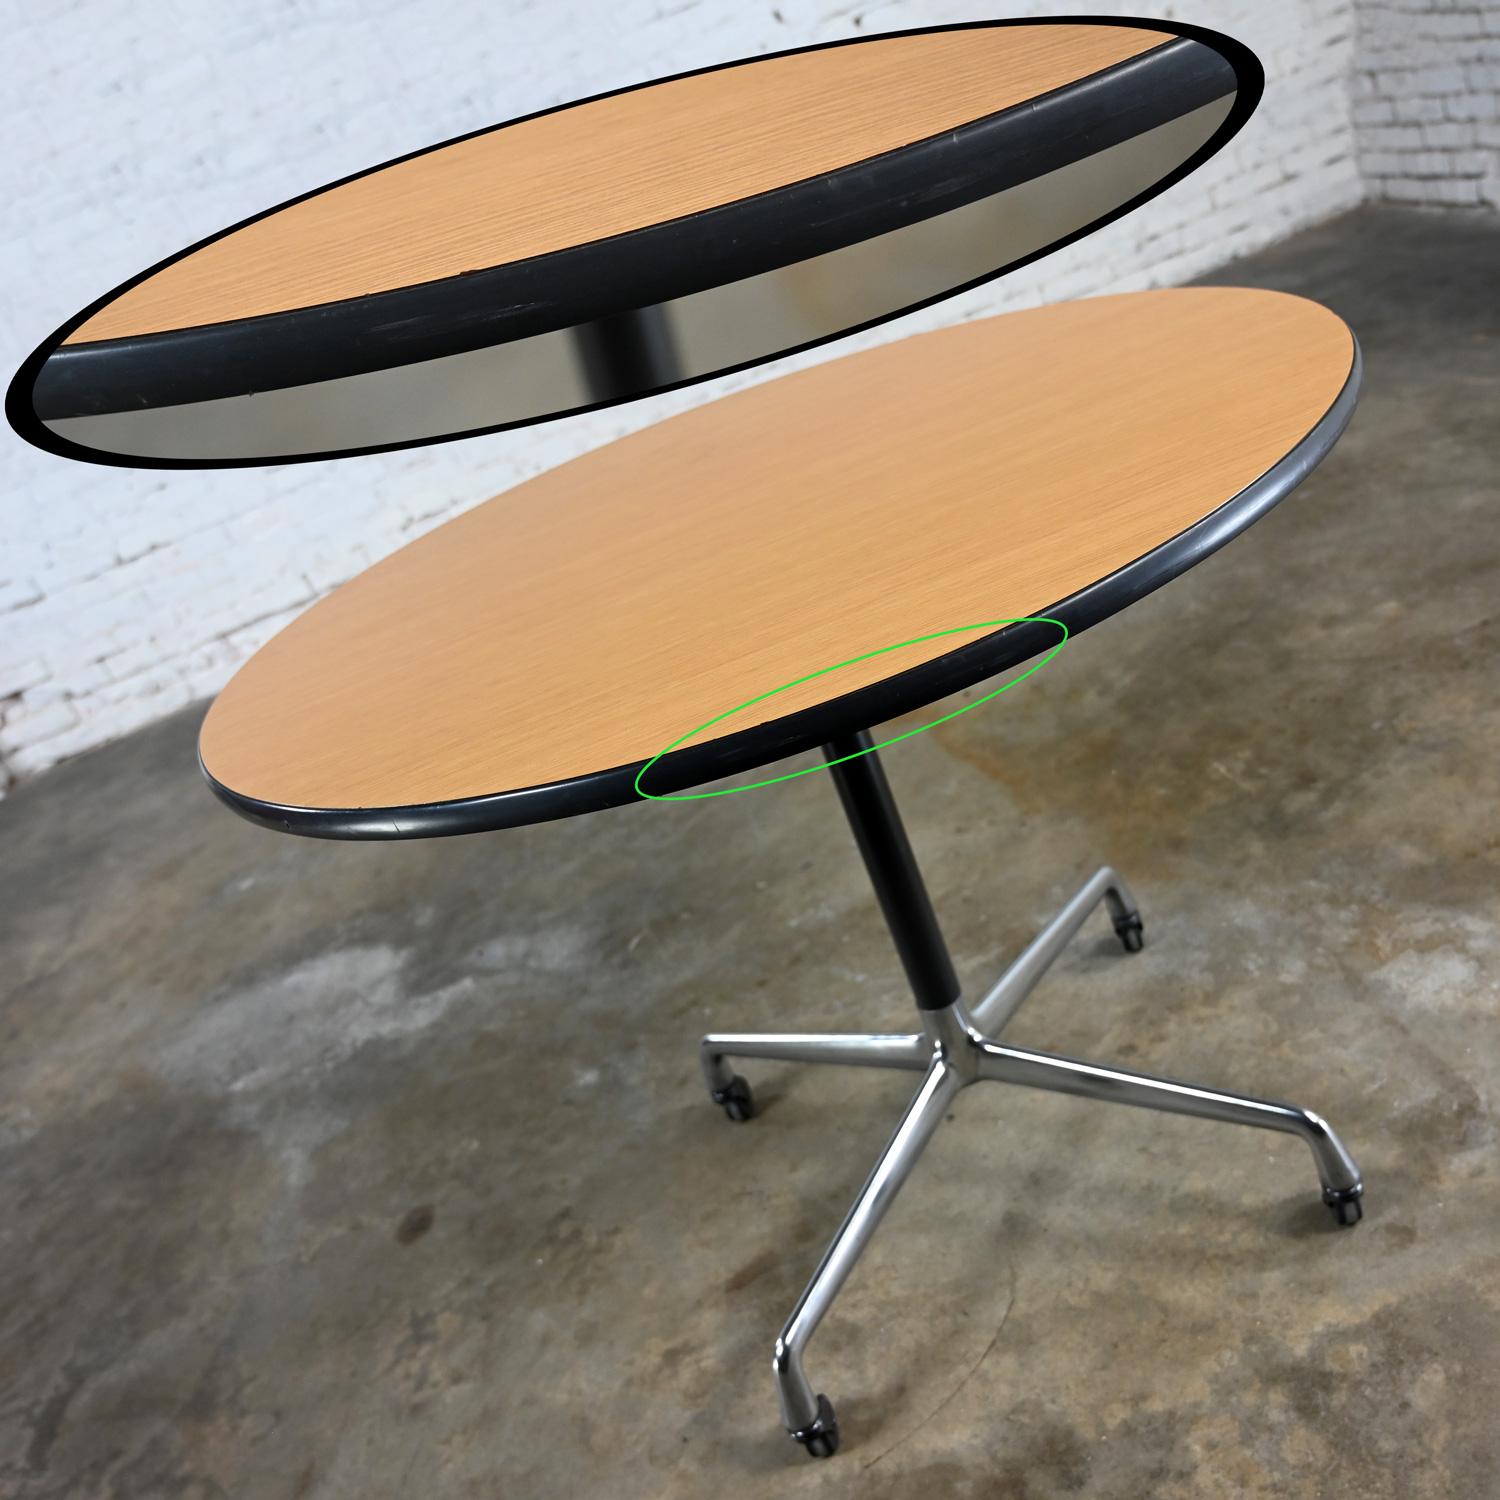 Eames Herman Miller Round Table Universal Base Casters & 36” Blonde Laminate Top For Sale 6